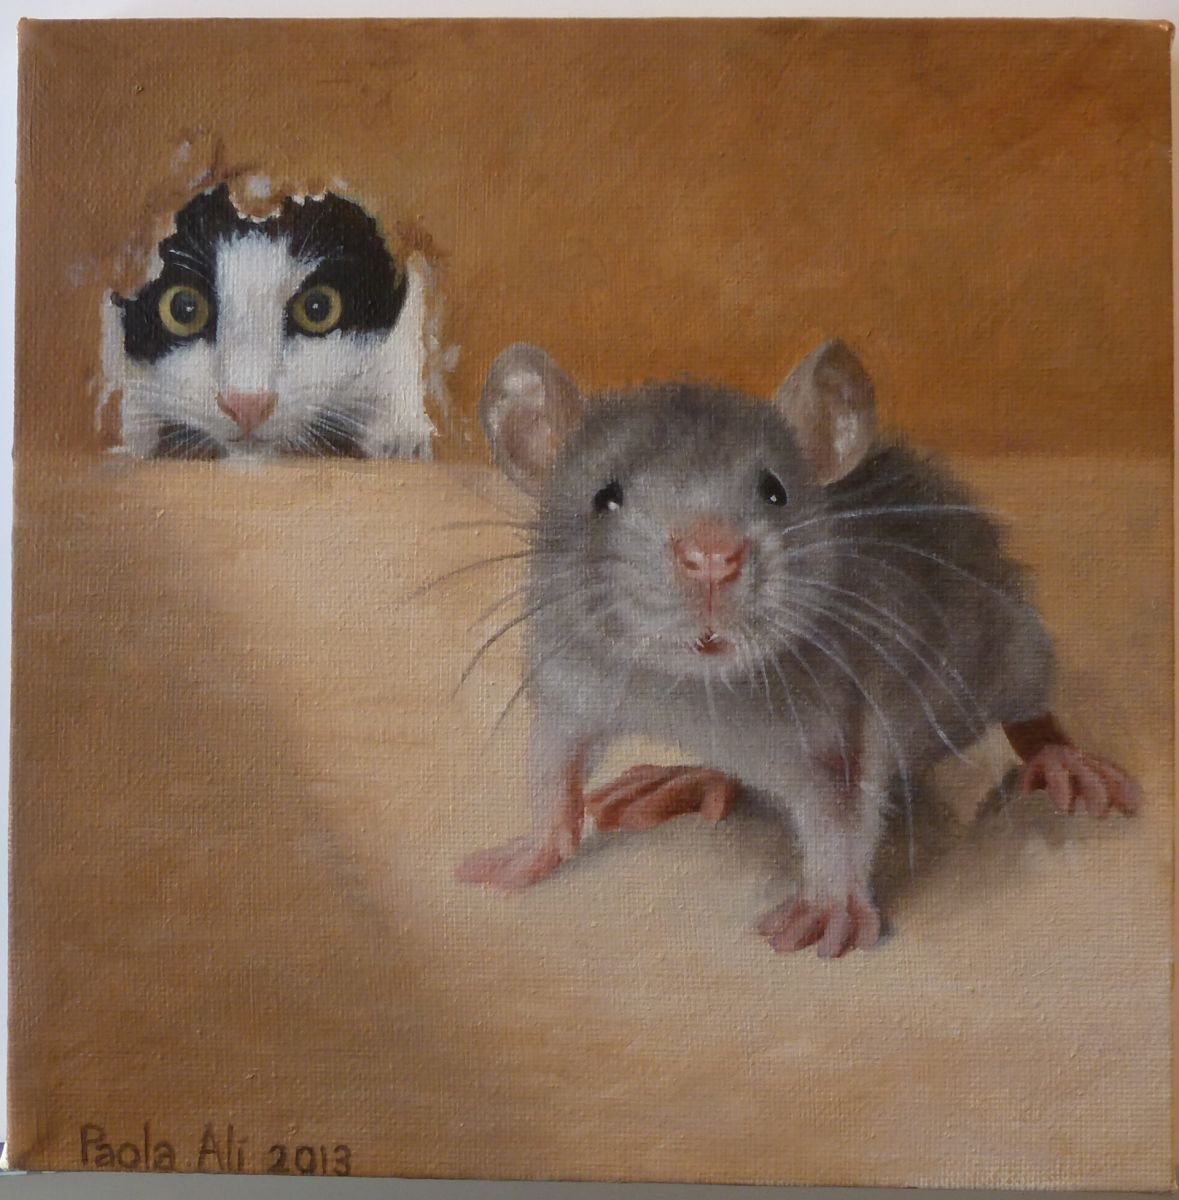 cat and mouse story by Paola Ali